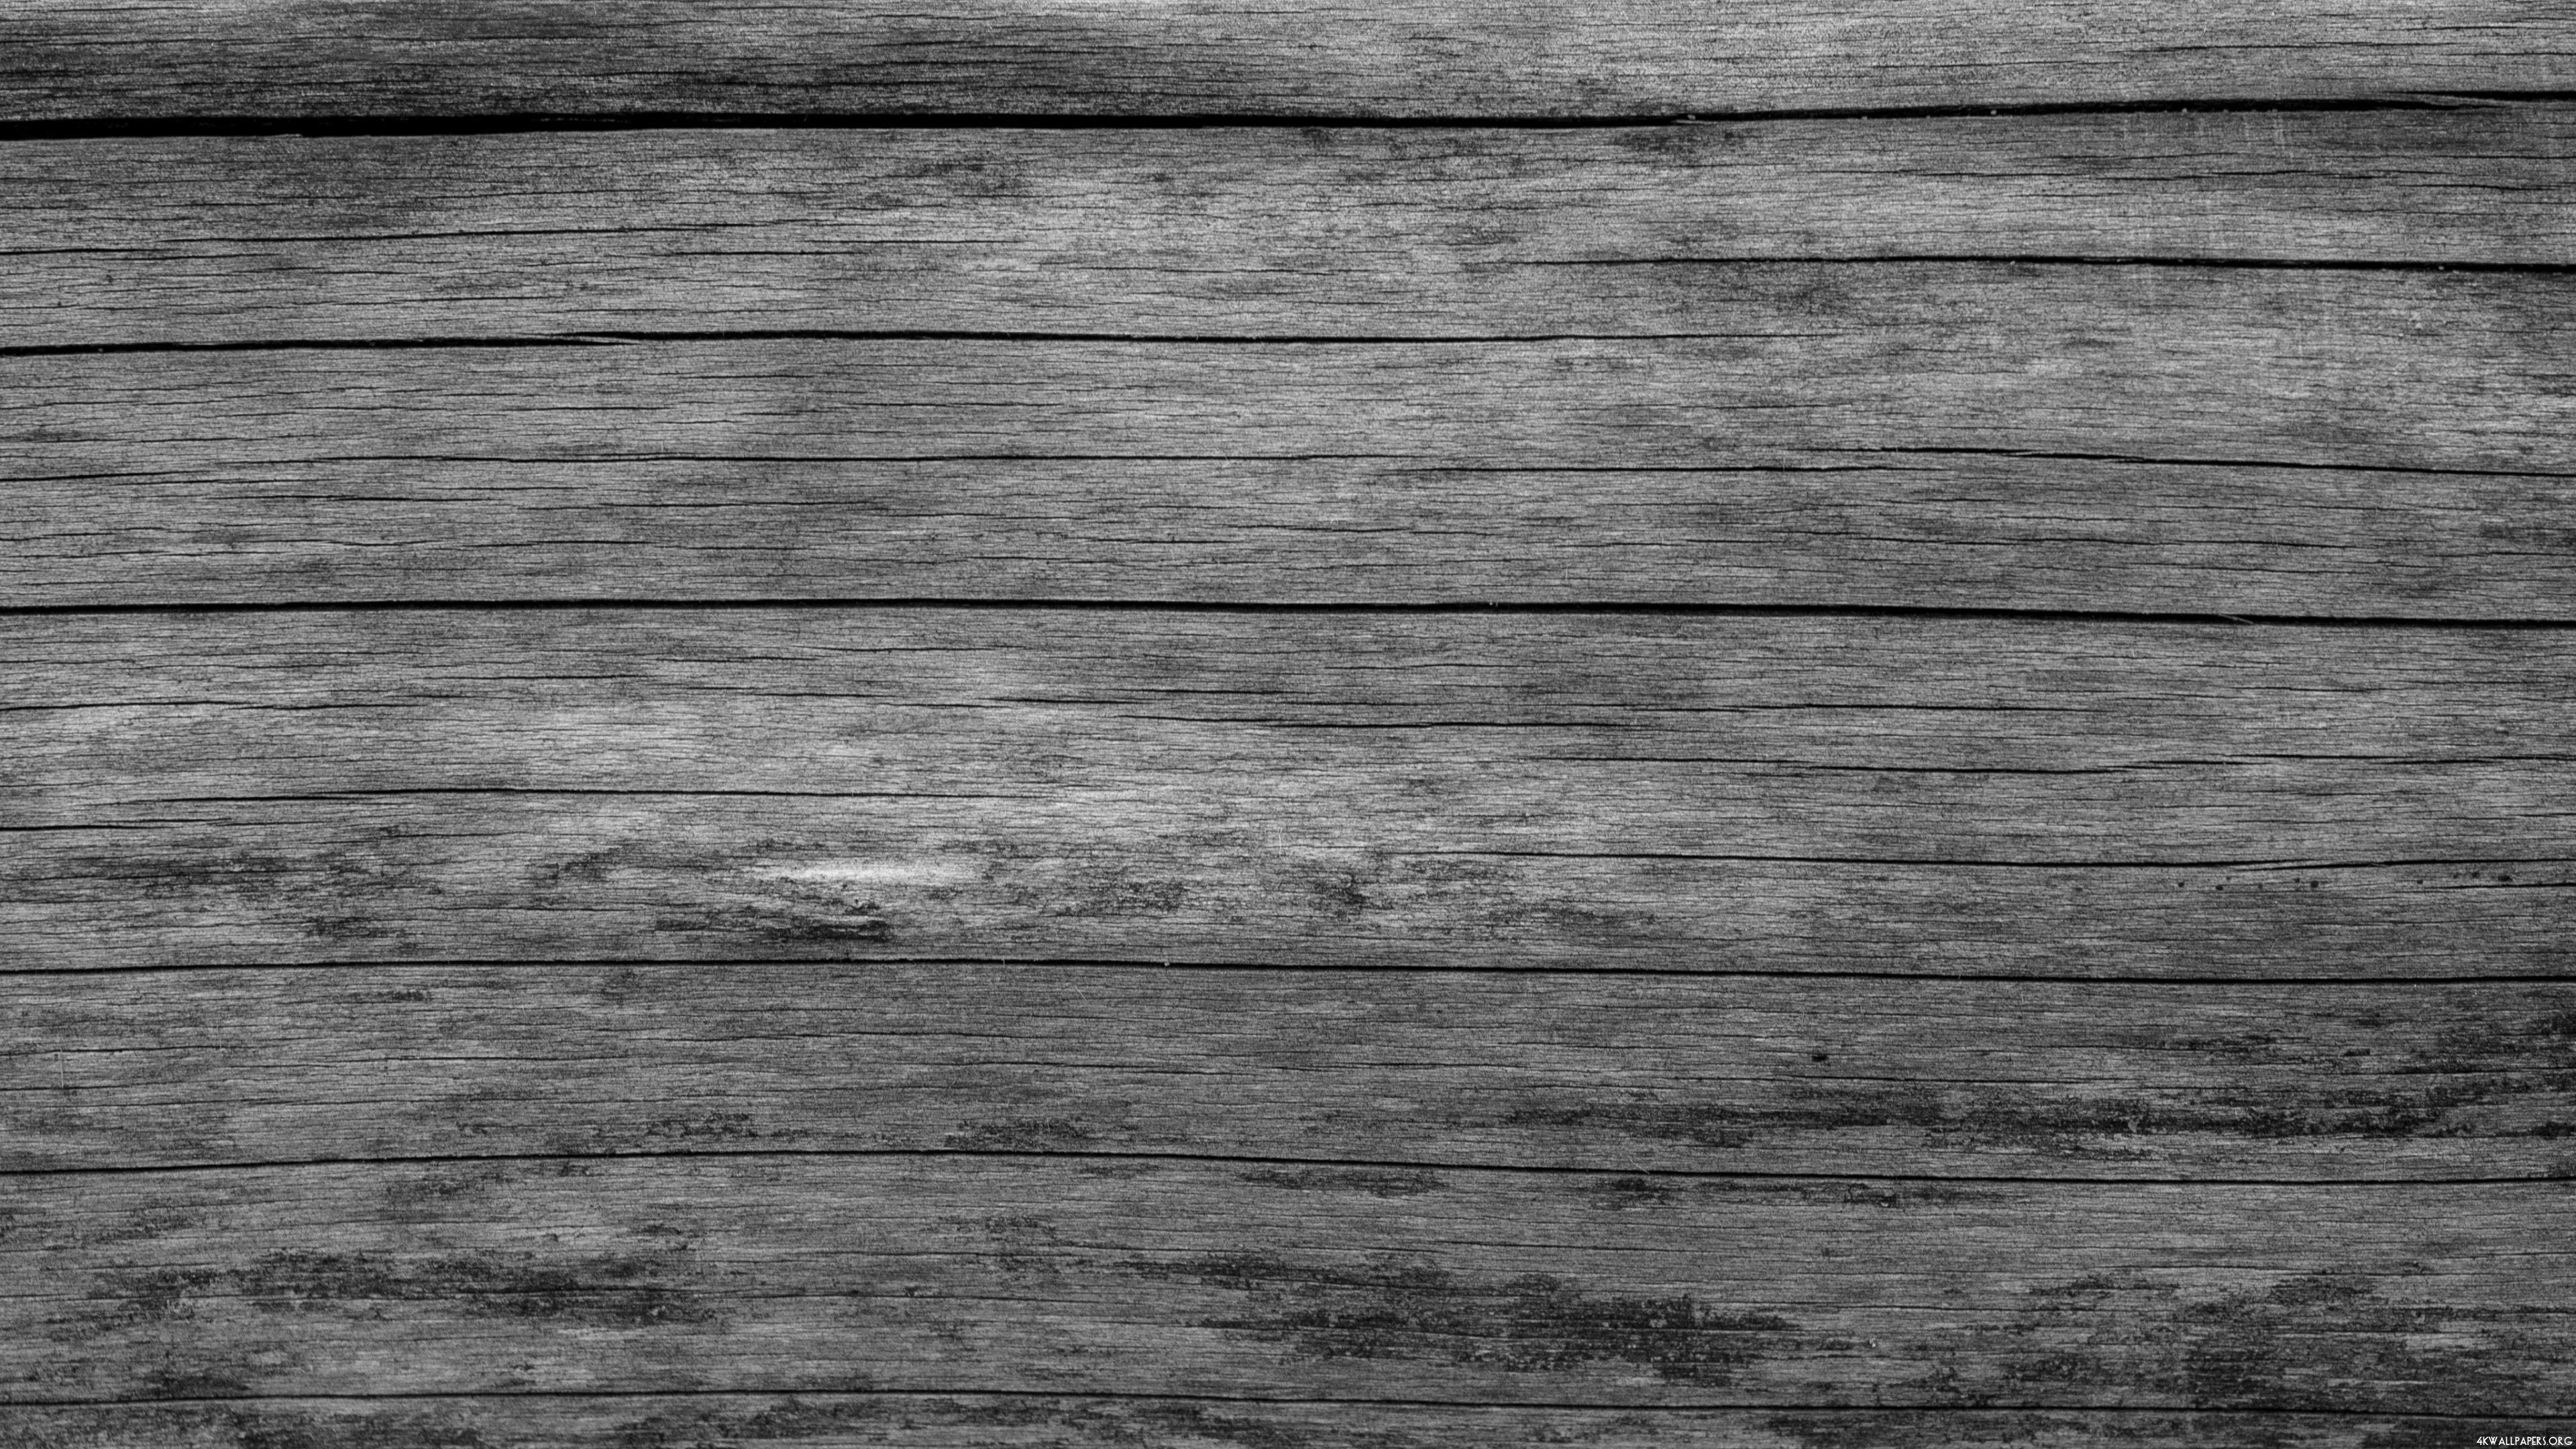  Wood  4K  Wallpapers  Top Free Wood  4K  Backgrounds 